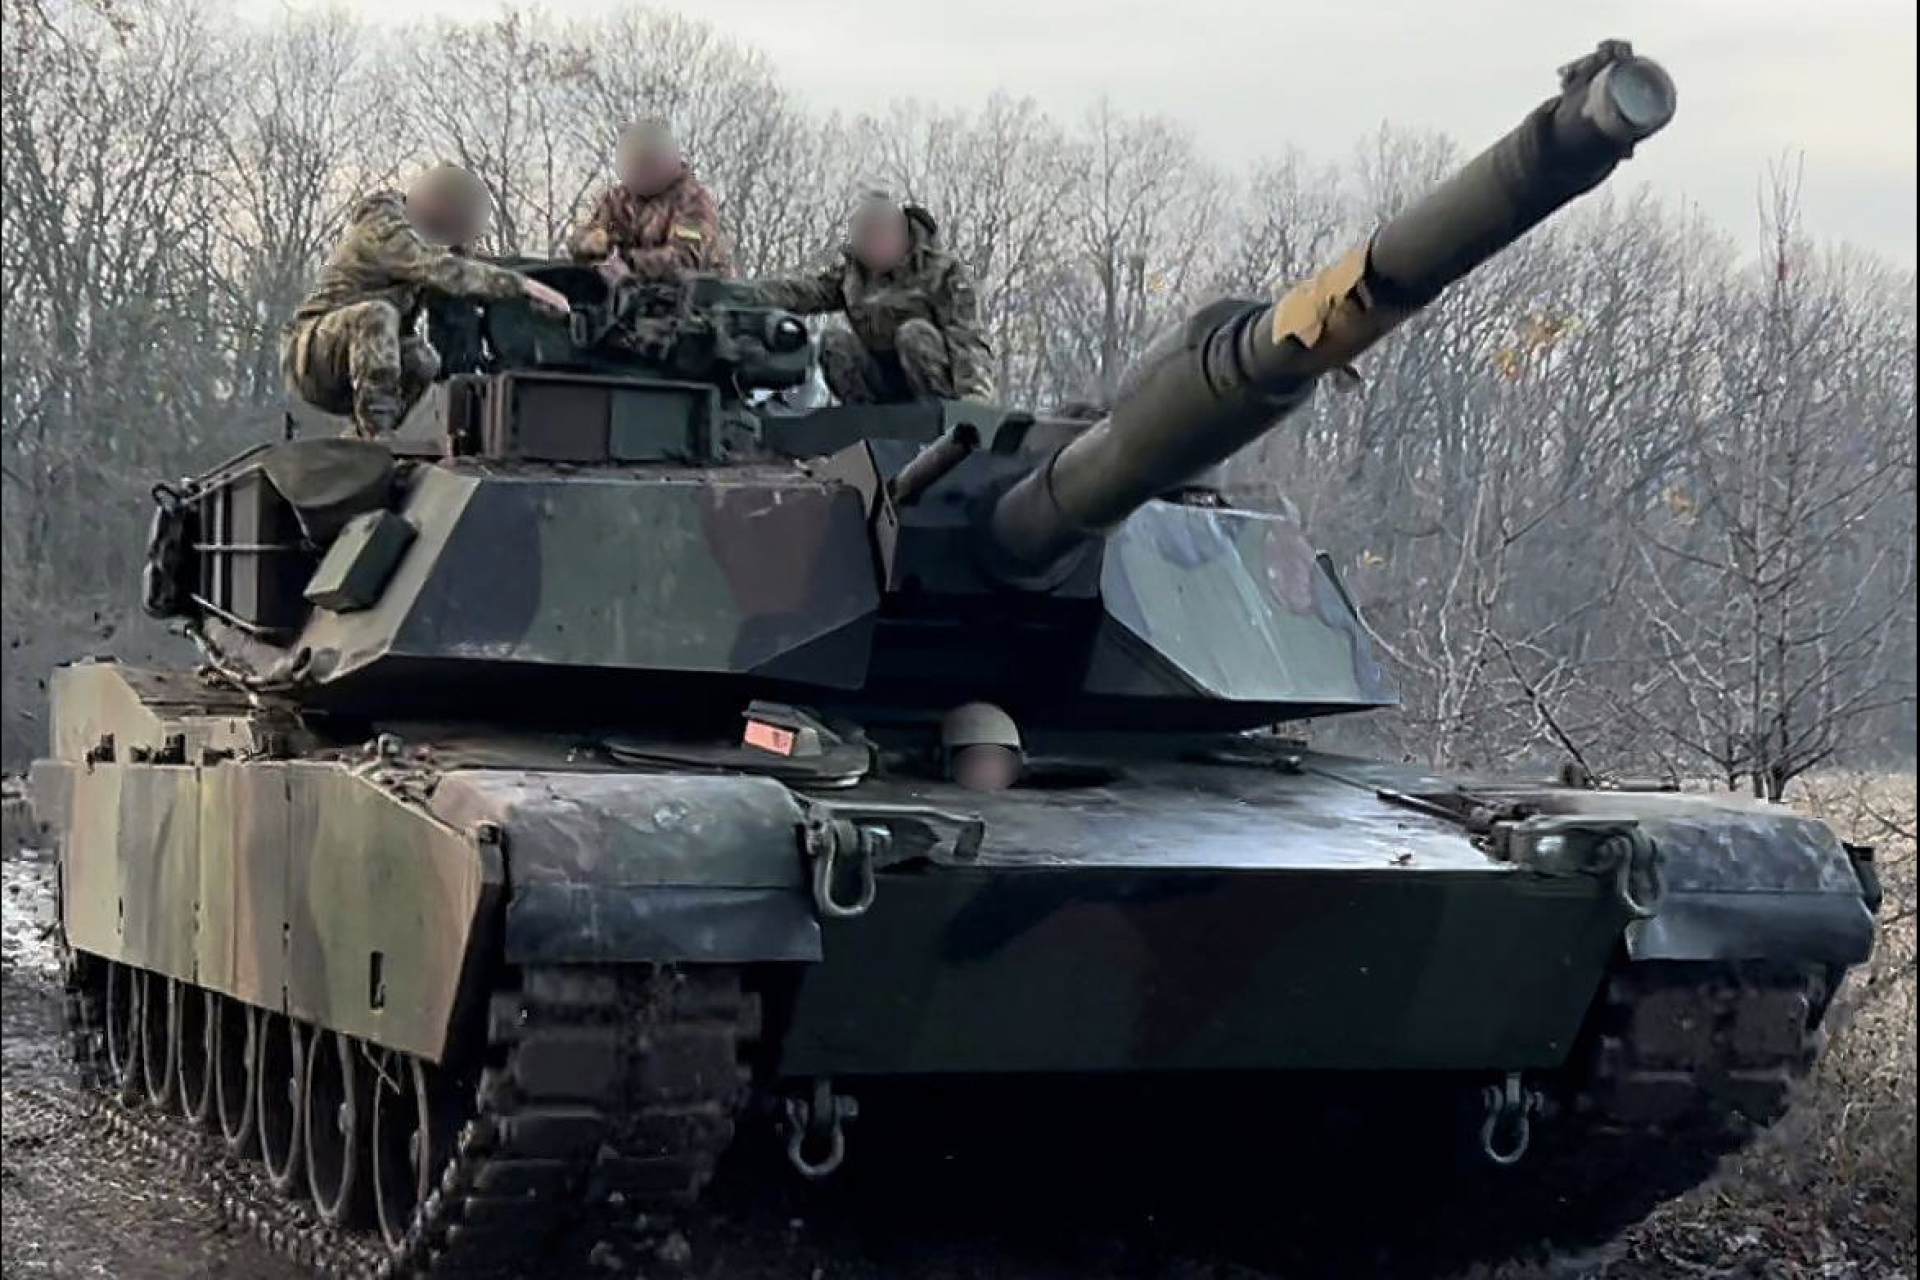 The M1 Abrams makes its first appearance